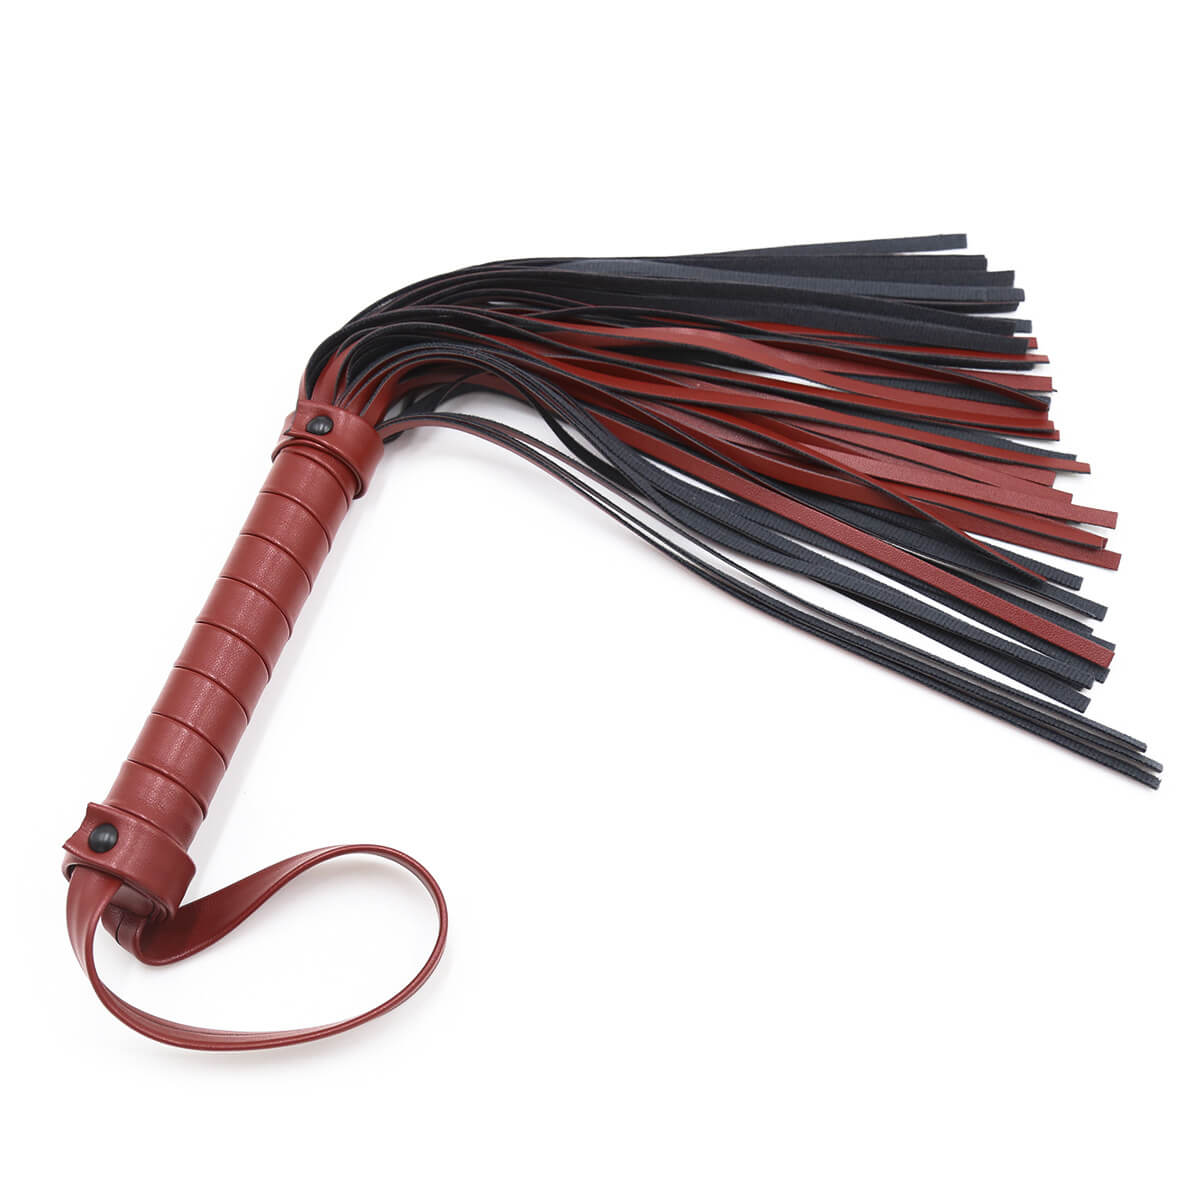 Red Horse Crop Whip - with fringes for a beating of love